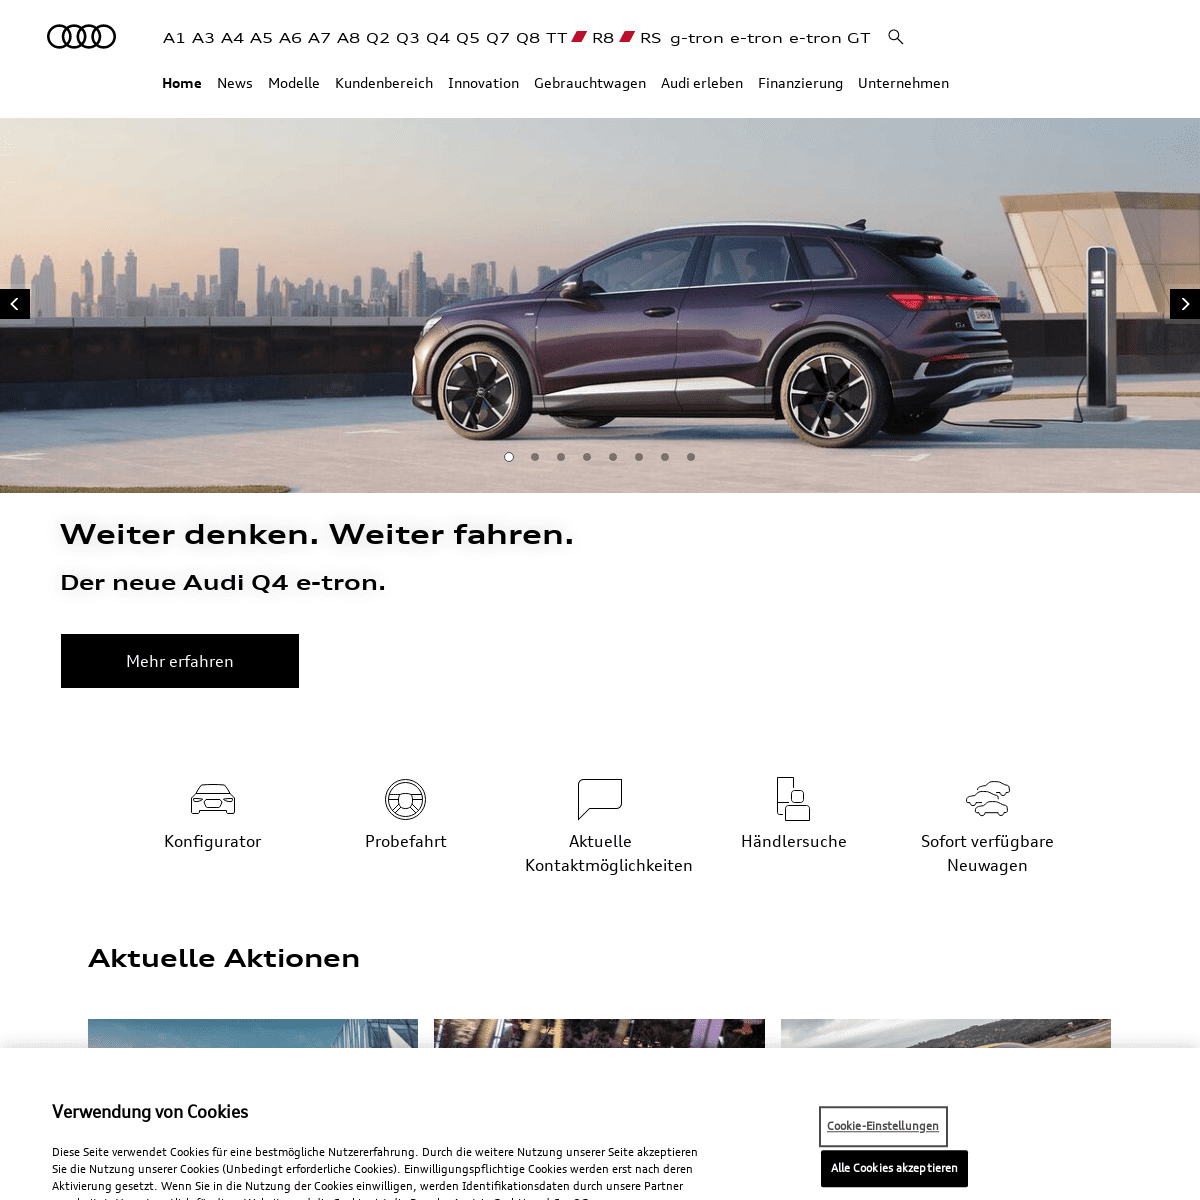 A complete backup of https://audi.at